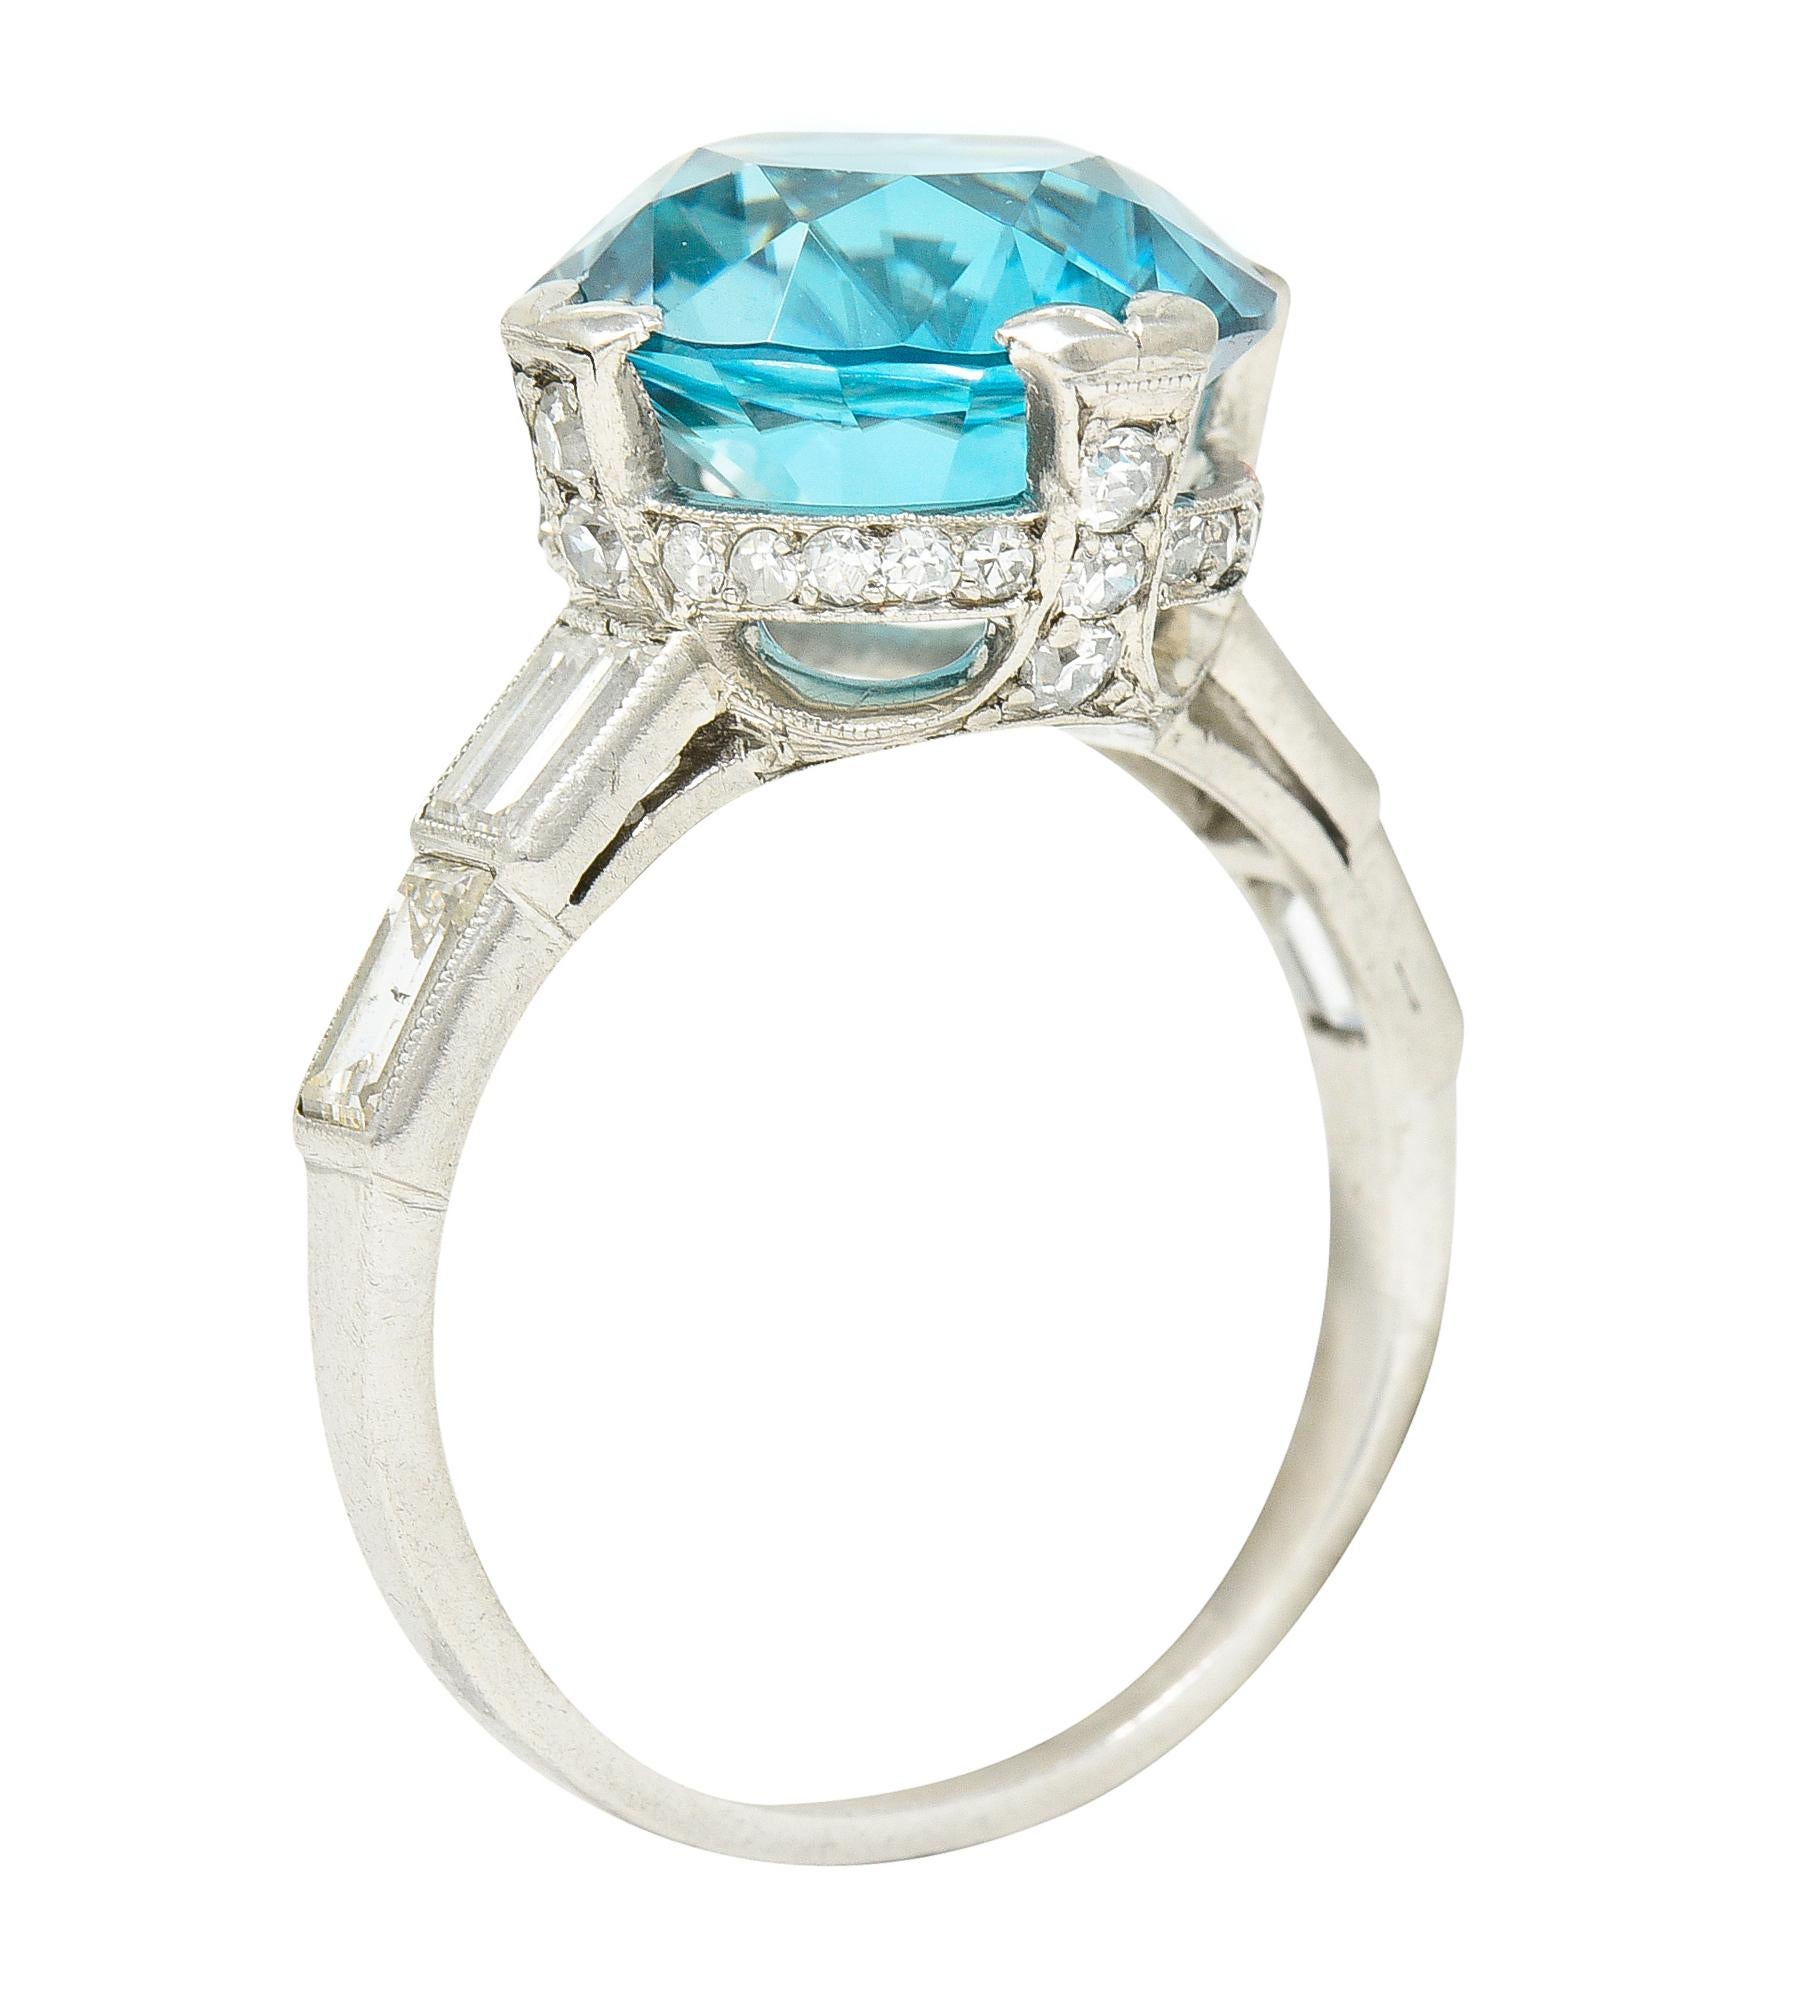 Centering a round cut zircon weighing approximately 8.26 carats - transparent blue in color. Prong set with engraved split prongs in a stylized pierced basket with old single cut diamonds. Bead set and weighing approximately 0.66 carats total - G/H